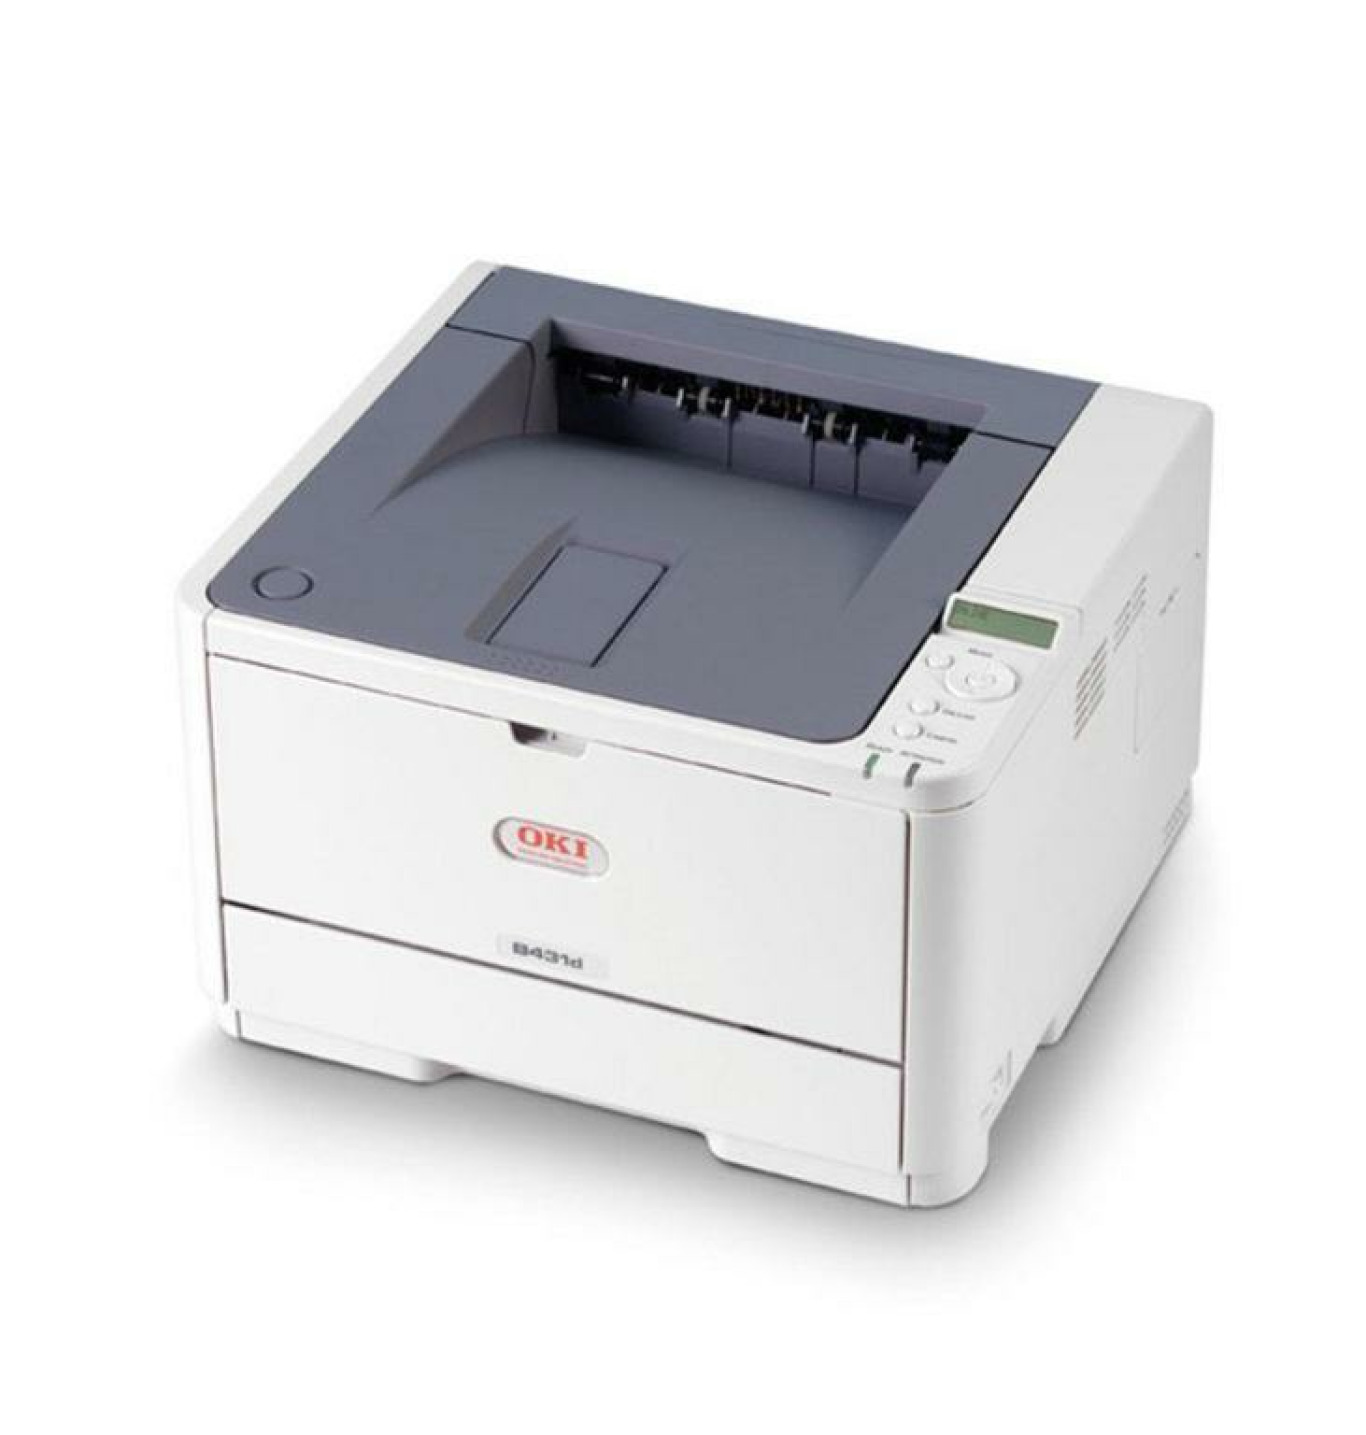 Oki B 431 DN Above 75% Used A Ethernet Parallel Usb &lt;100K pages A4 A5 B5 B/W Laser-Printer UNL